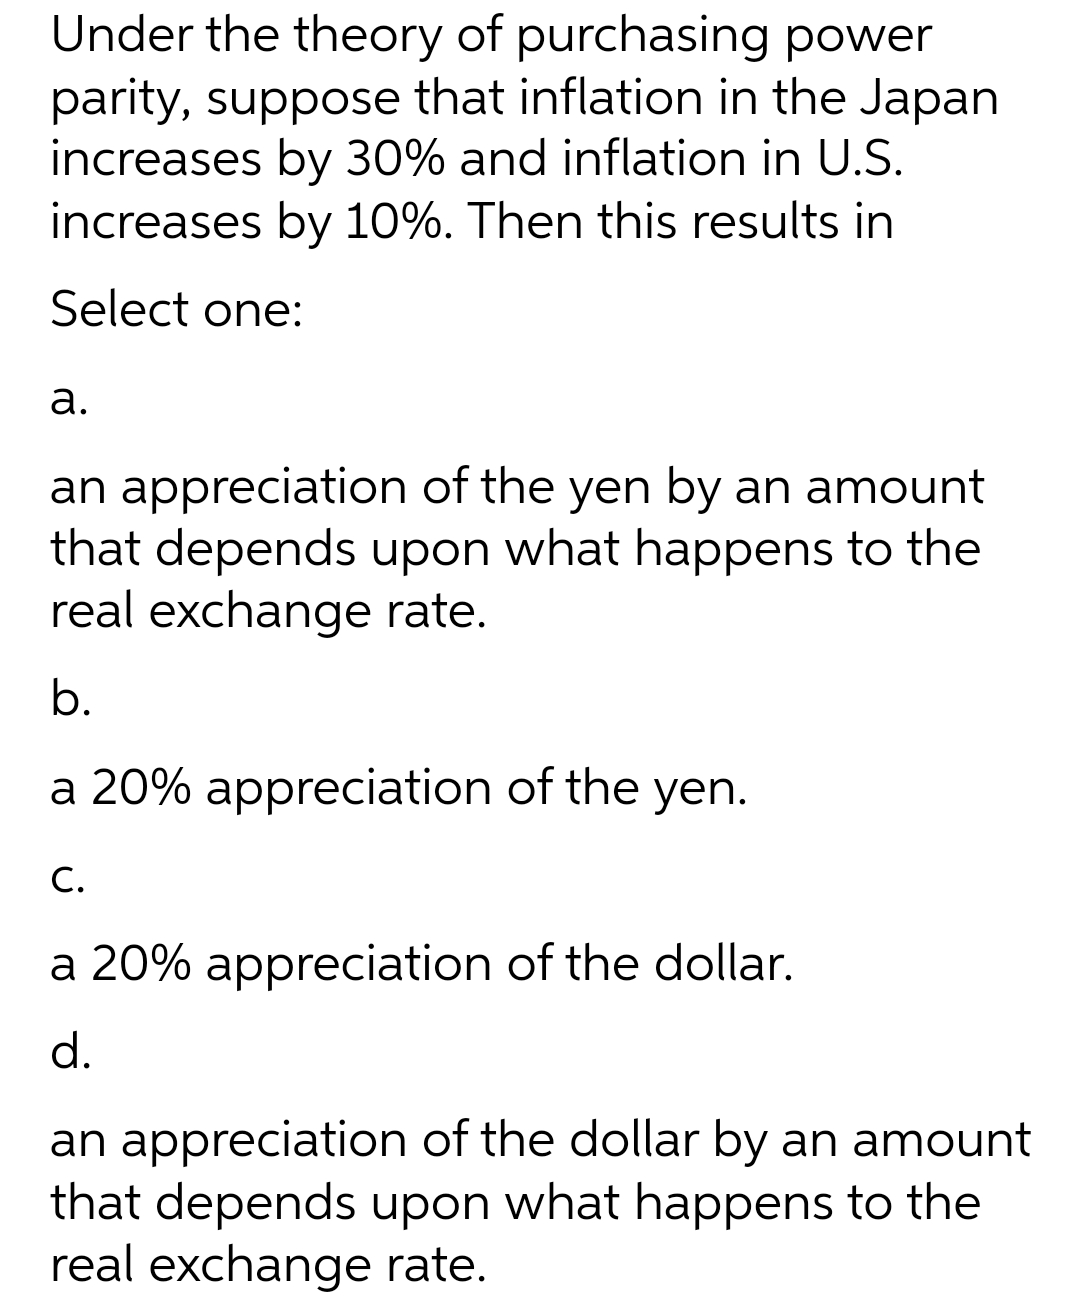 Under the theory of purchasing power
parity, suppose that inflation in the Japan
increases by 30% and inflation in U.S.
increases by 10%. Then this results in
Select one:
а.
an appreciation of the yen by an amount
that depends upon what happens to the
real exchange rate.
b.
a 20% appreciation of the yen.
С.
a 20% appreciation of the dollar.
d.
an appreciation of the dollar by an amount
that depends upon what happens to the
real exchange rate.
